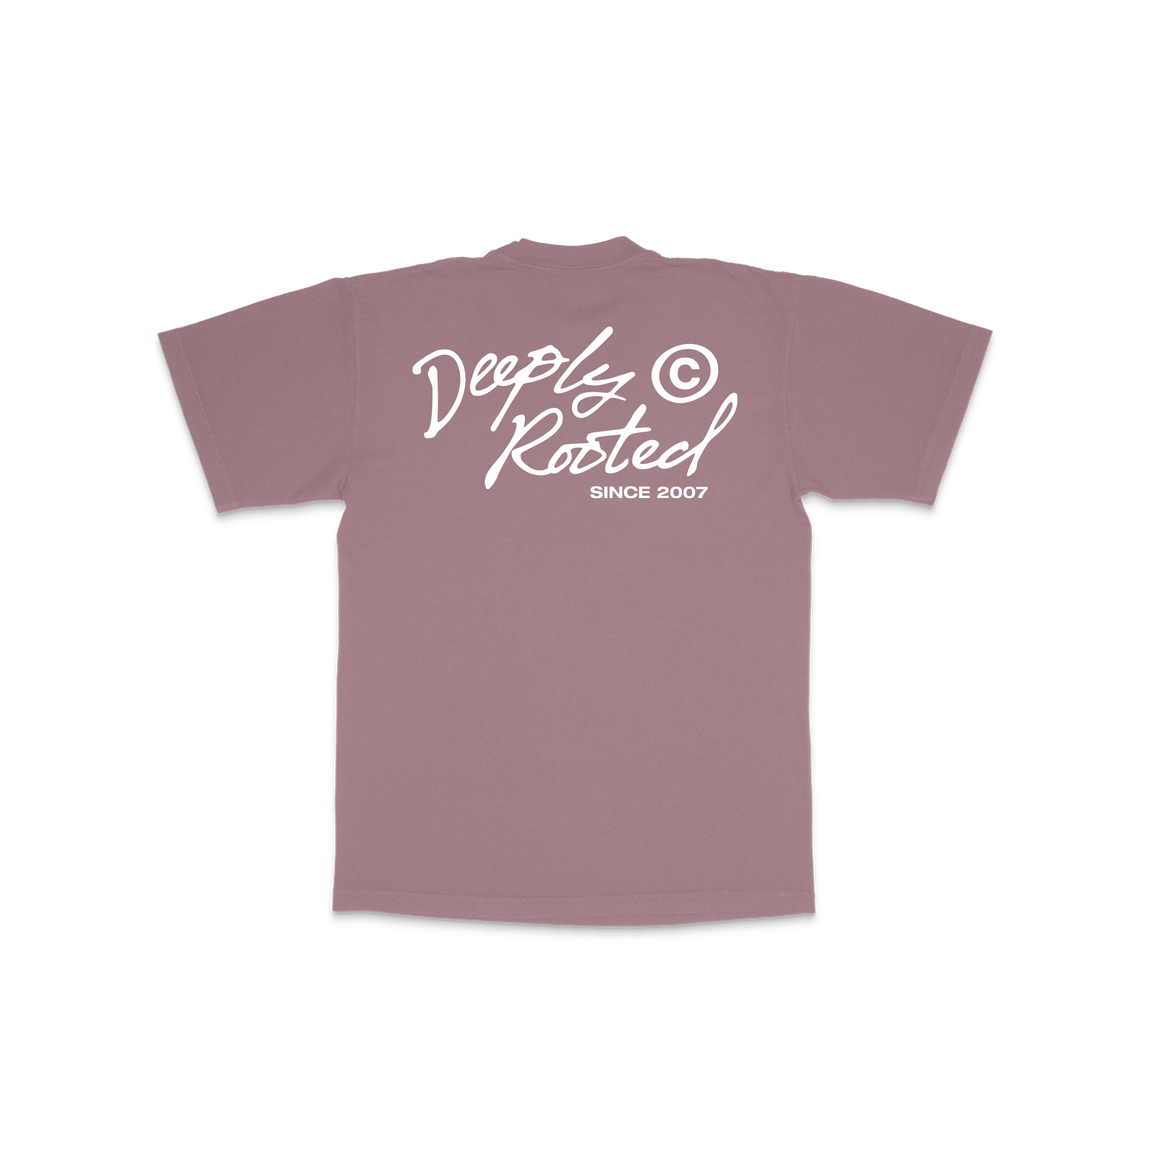 Centre Deeply Rooted Tee (Mauve) - Centre Deeply Rooted Tee (Mauve) - 